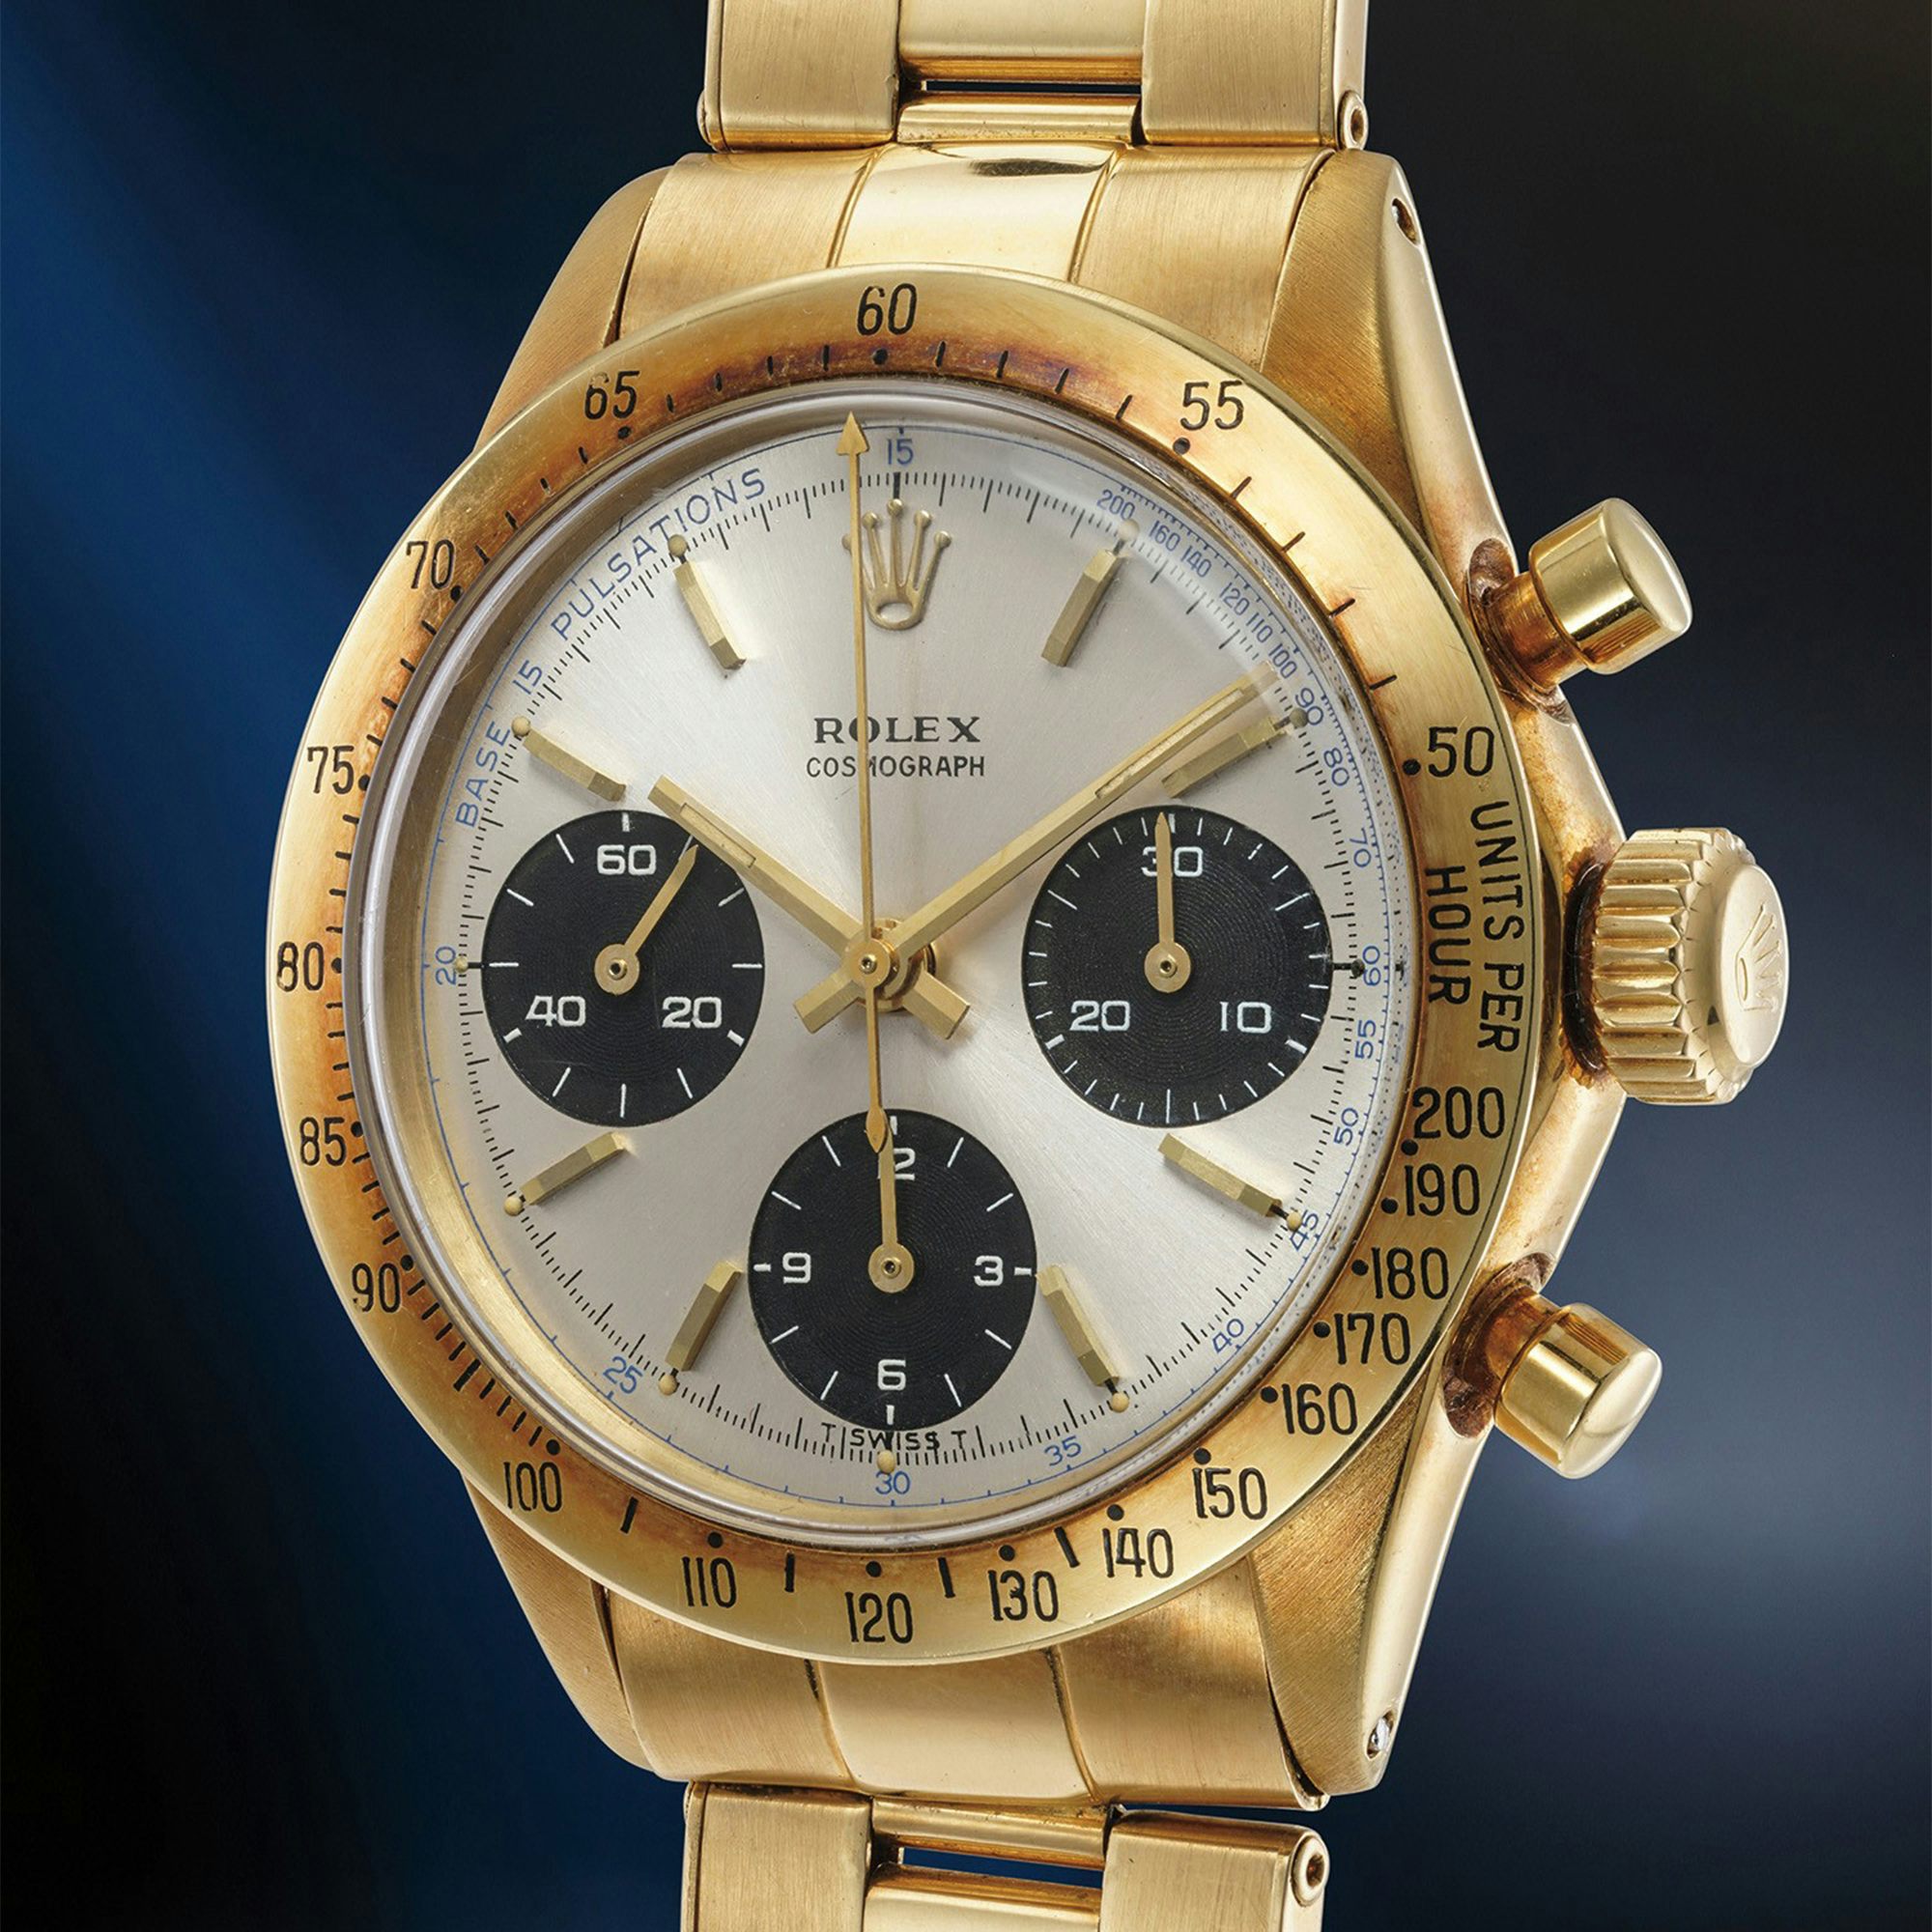 Rolex Cosmograph Daytona Ref. 6239 'Crazy Doc' previously owned by Eric Clapton.